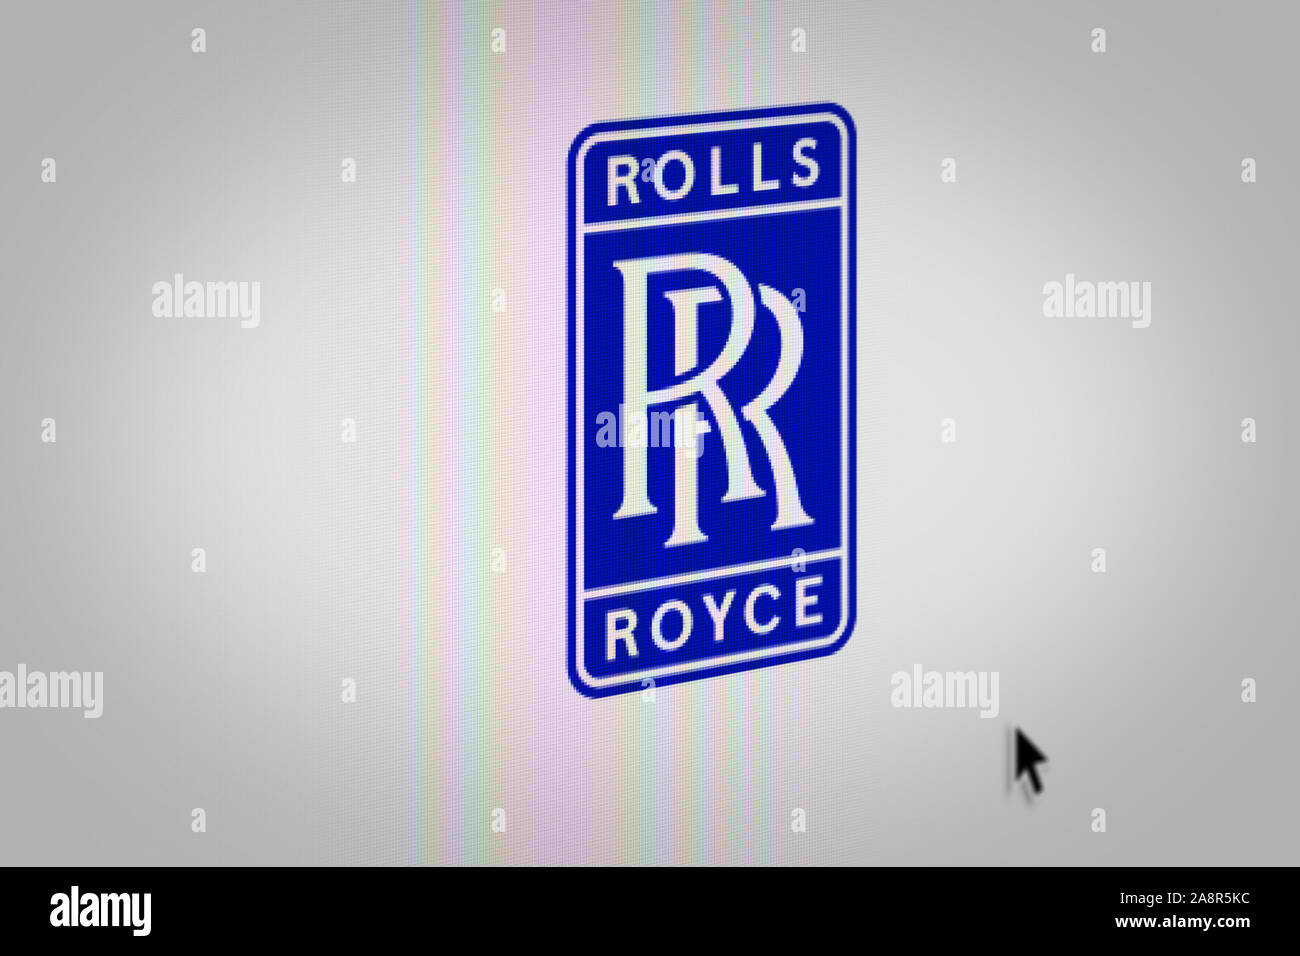 Logo of the public company Rolls-Royce Holdings displayed on a computer  screen in close-up. Credit: PIXDUCE Stock Photo - Alamy